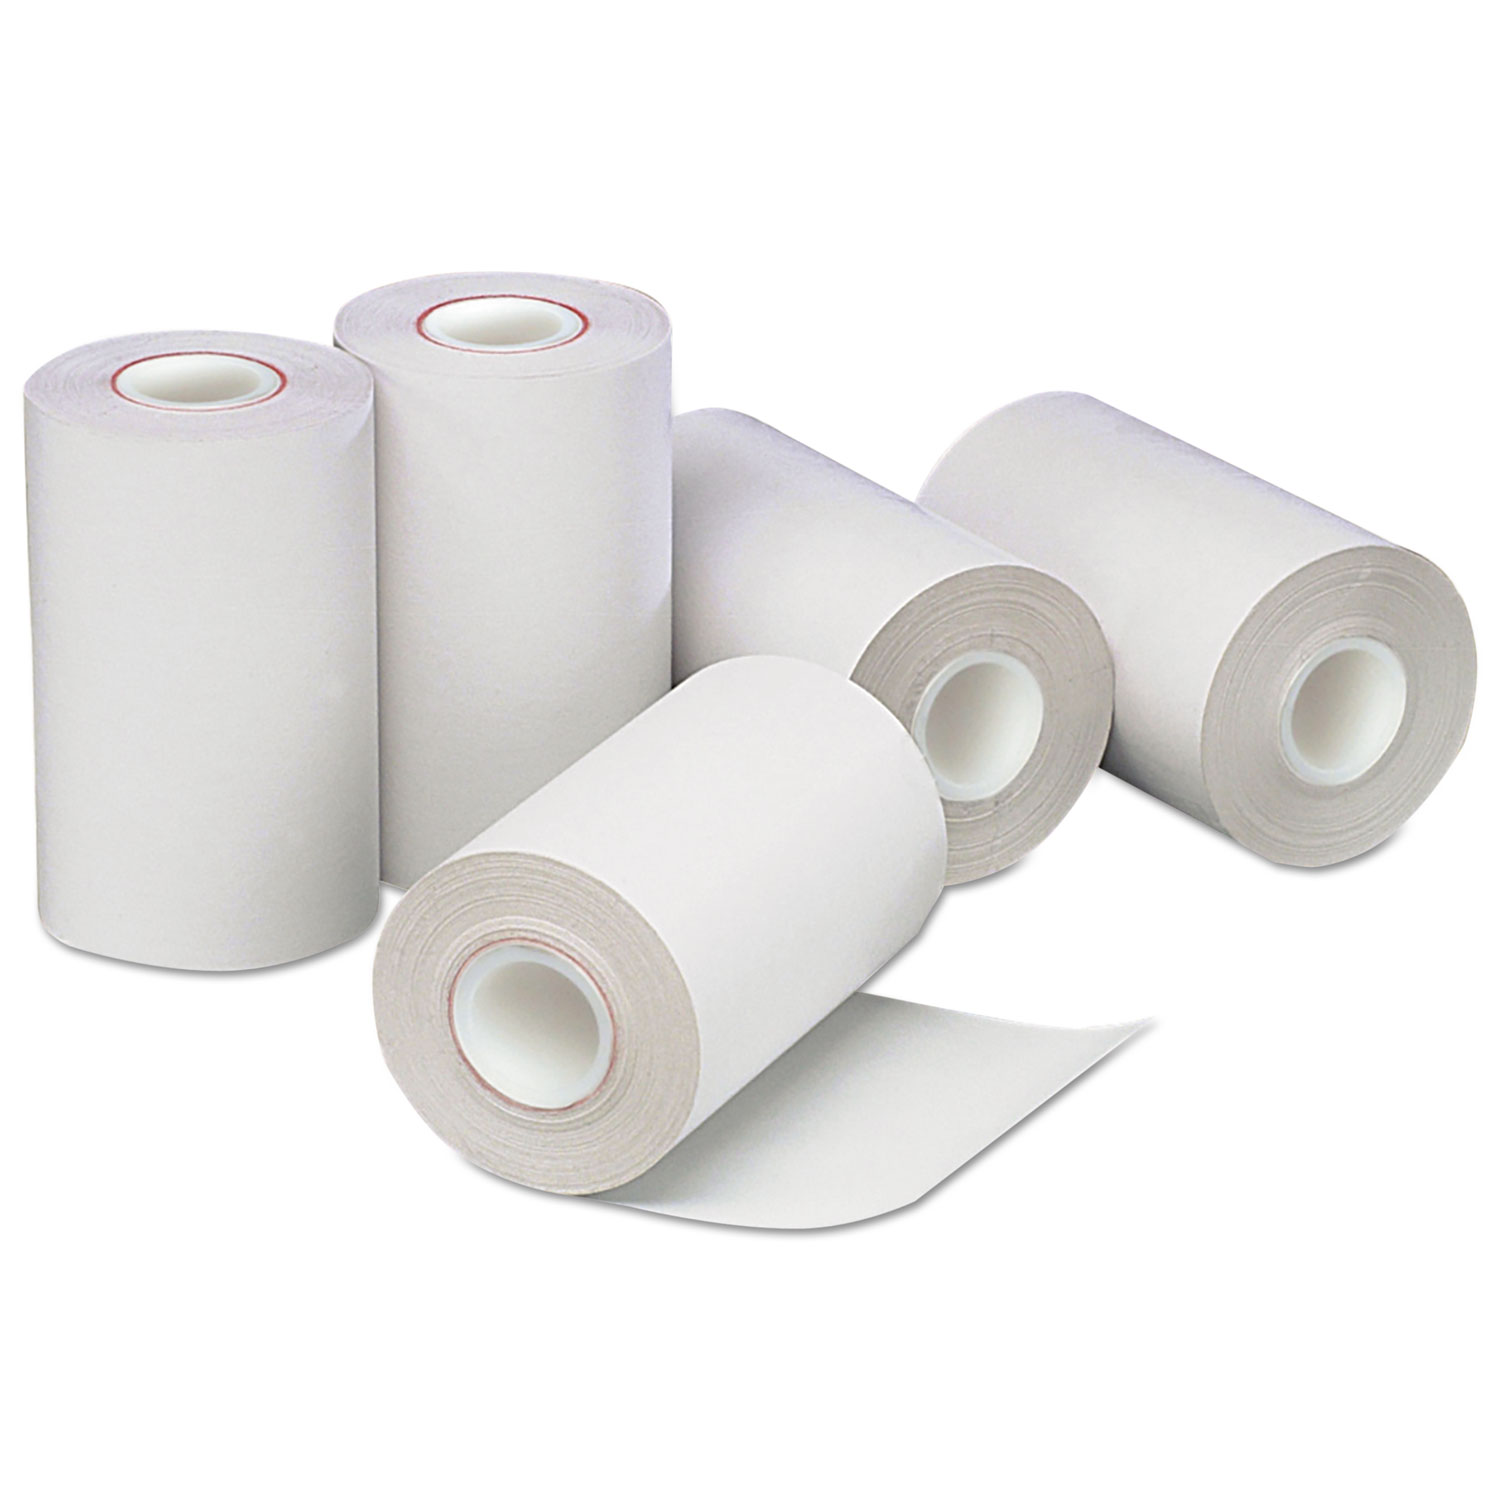  Iconex 05260 Direct Thermal Printing Paper Rolls, 0.5 Core, 2.25 x 55 ft, White, 50/Carton (ICX90783066) 